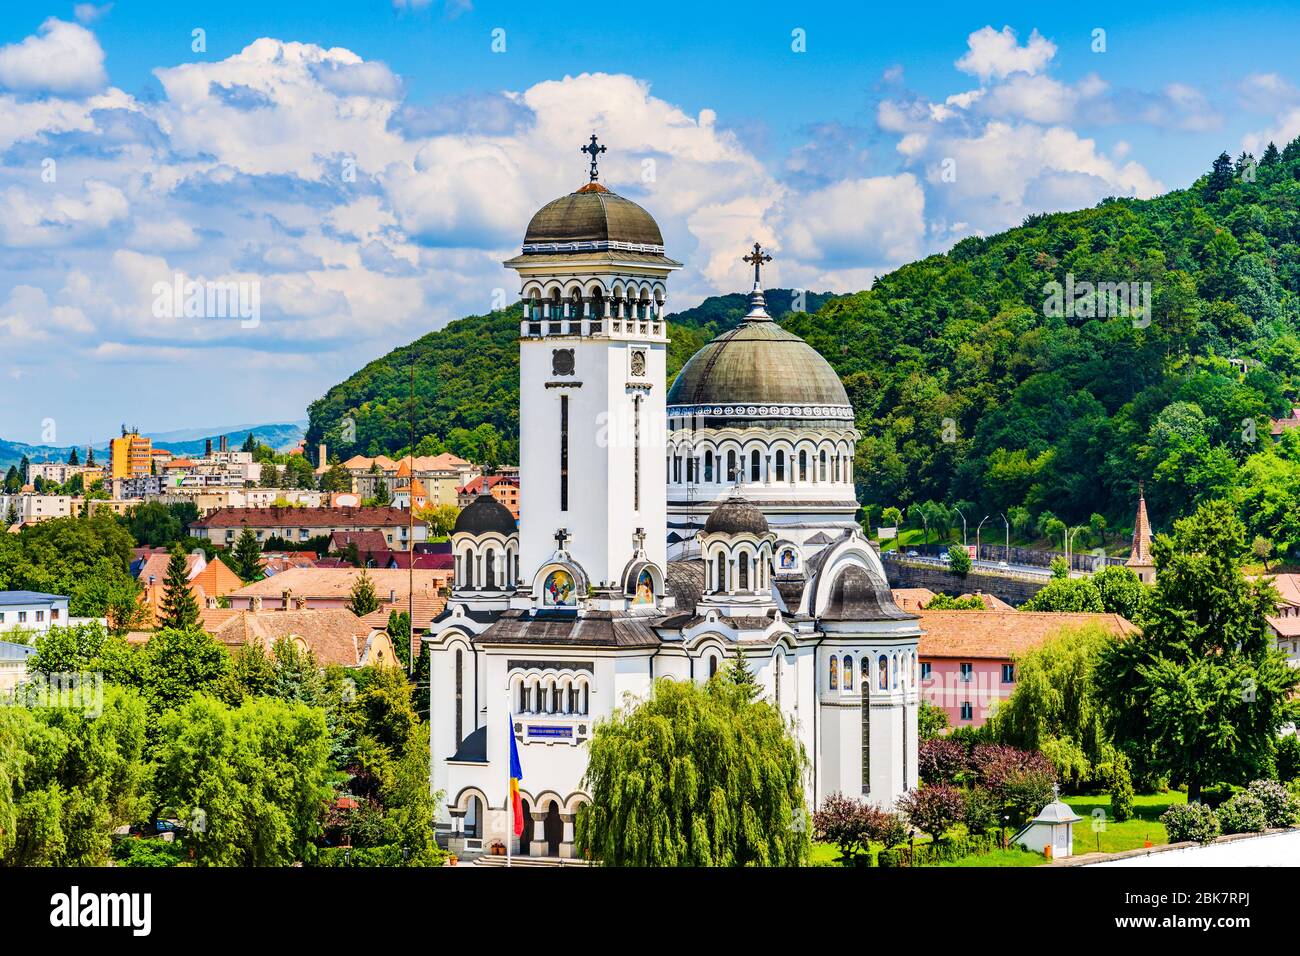 Sighisoara, Mures County, Romania: Landscape of The Holy Trinity (Stanta Treime) Orthodox church surrounded by home roof tops and green trees on a bac Stock Photo